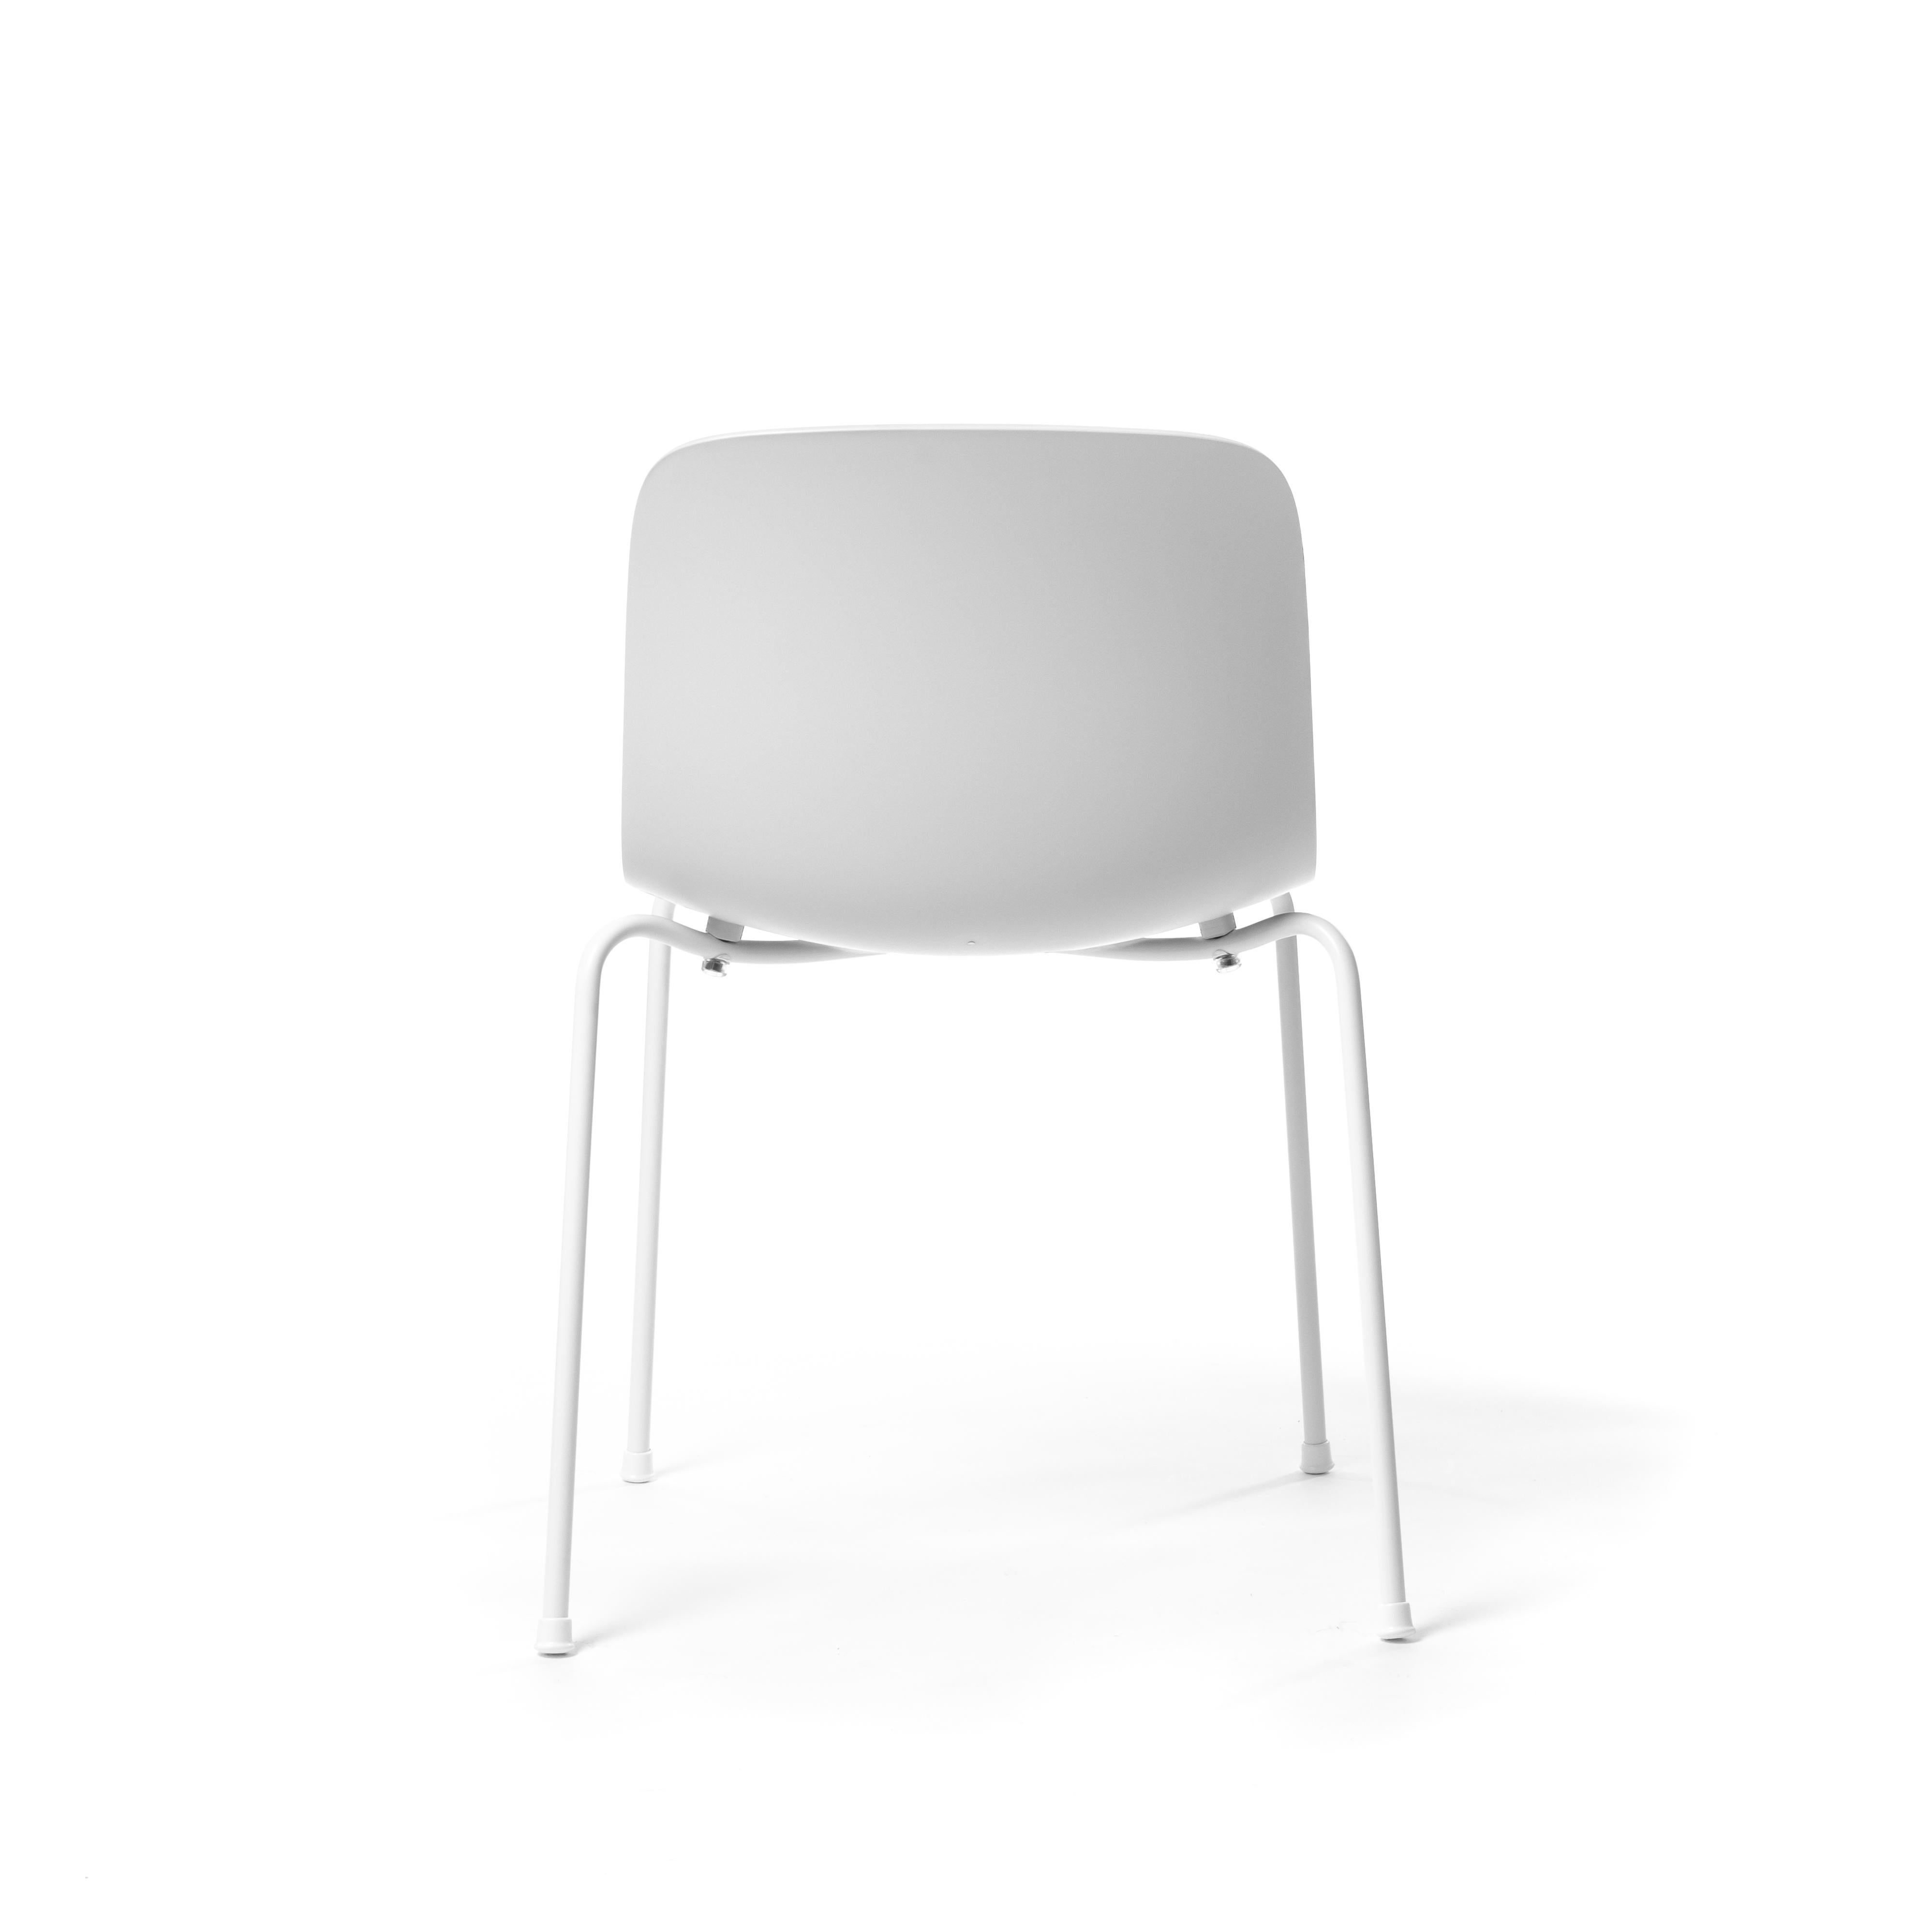 Troy is a concept of remarkable simplicity and comfort that gives shape to practically endless possible variations, playing on the use of different materials, combinations and seat types. This vast and various assortment with over two thousand